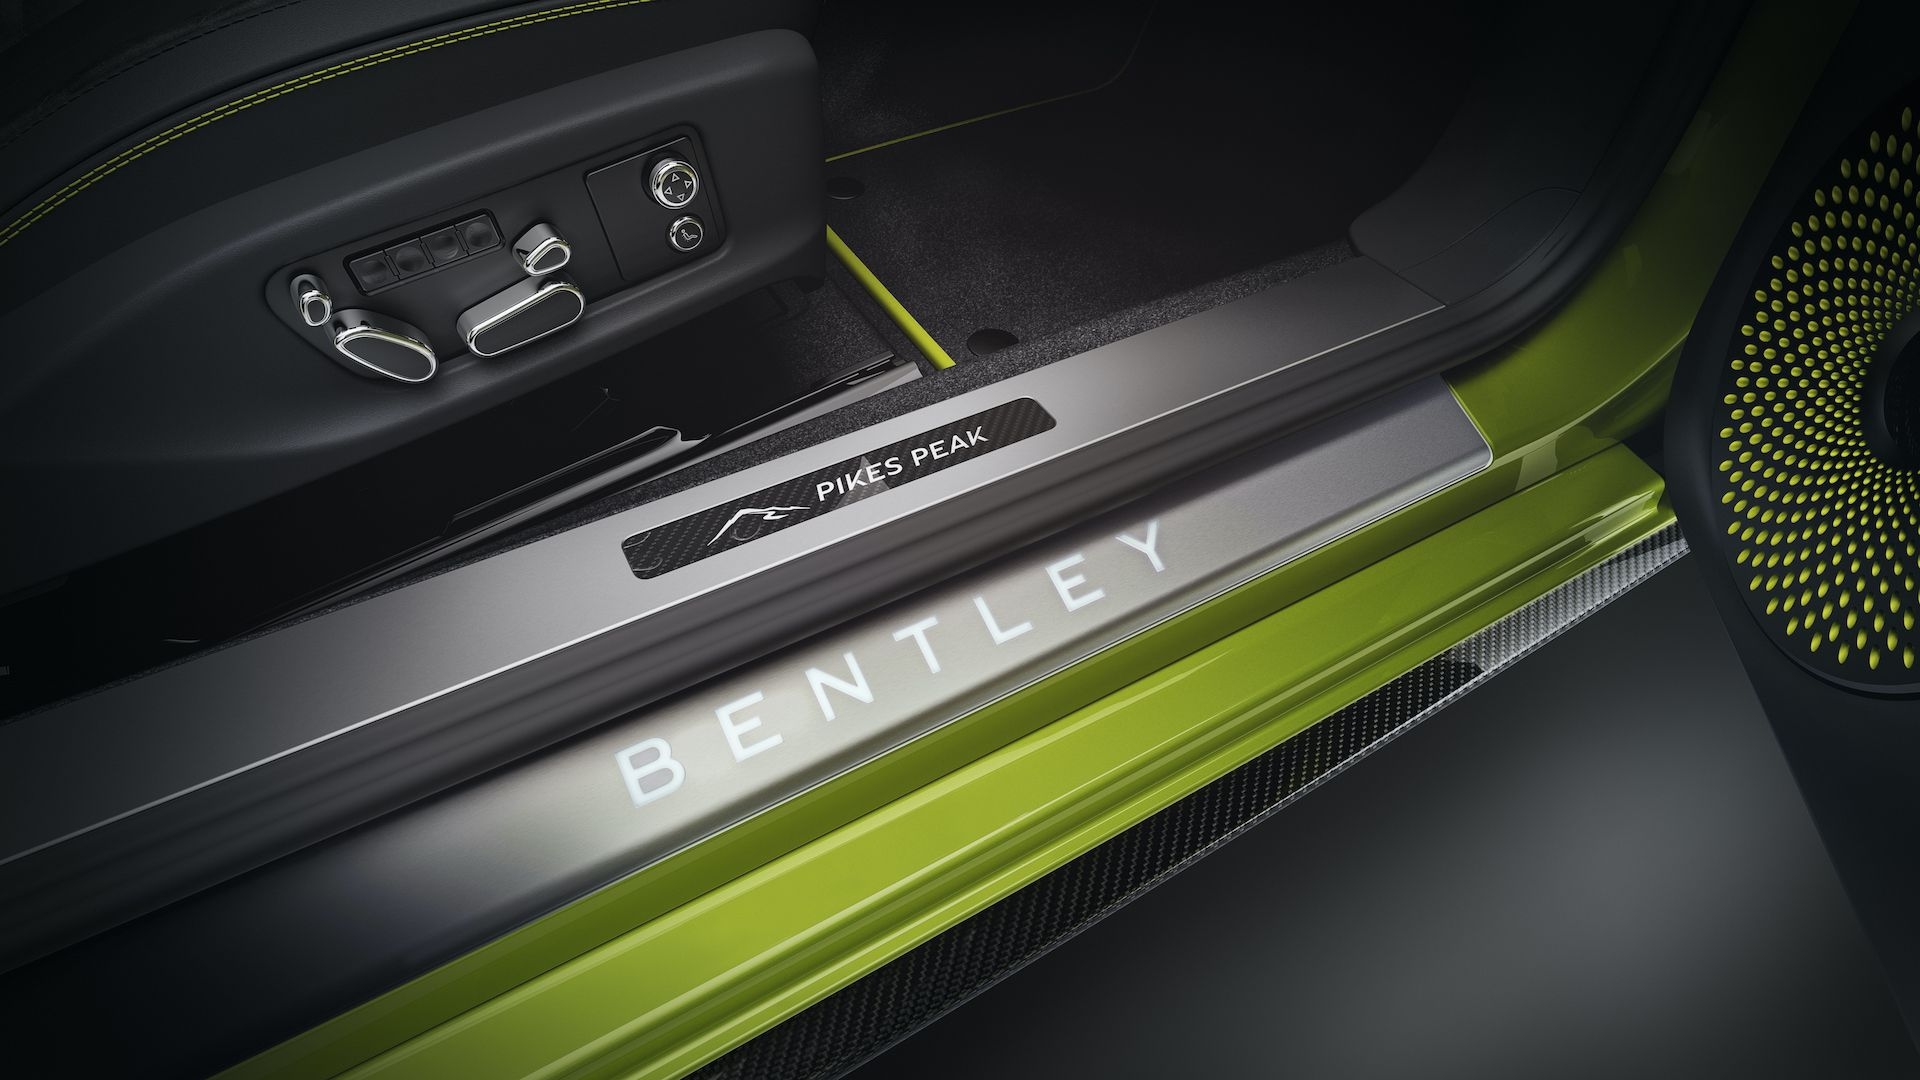 2019 Bentley Continental GT Pikes Peak Limited Edition